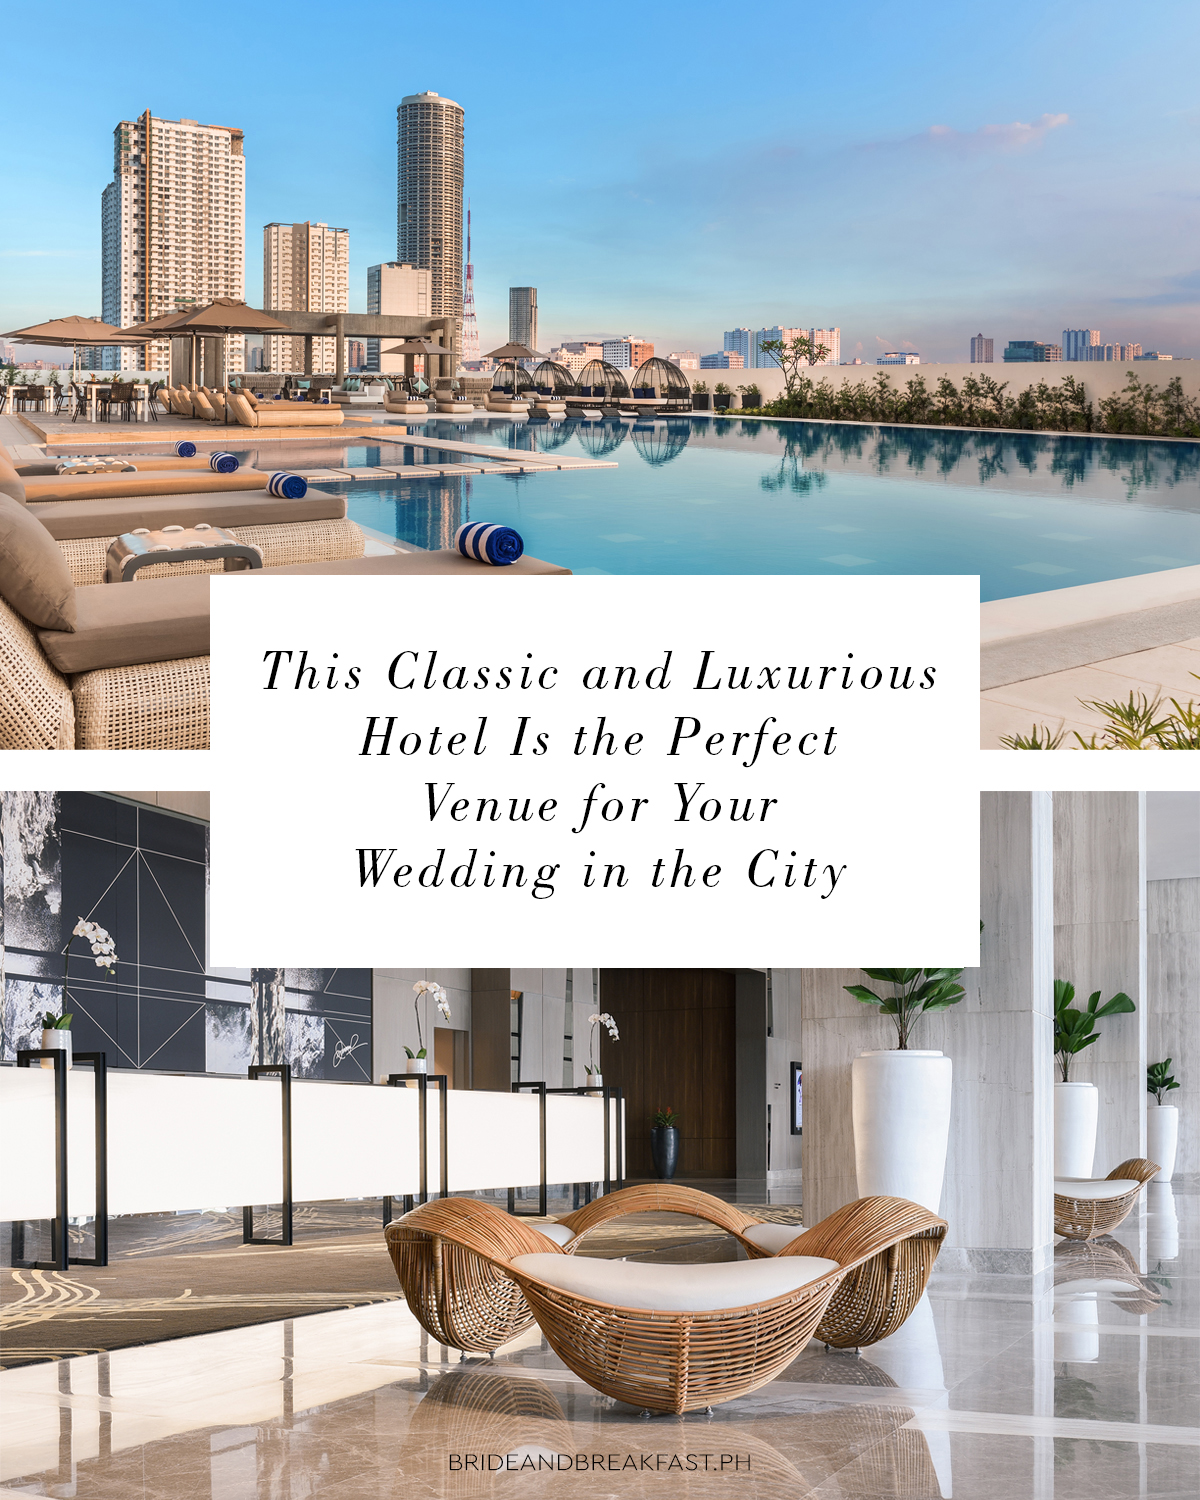 This Classic and Luxurious Hotel Is the Perfect Venue for Your Wedding in the City